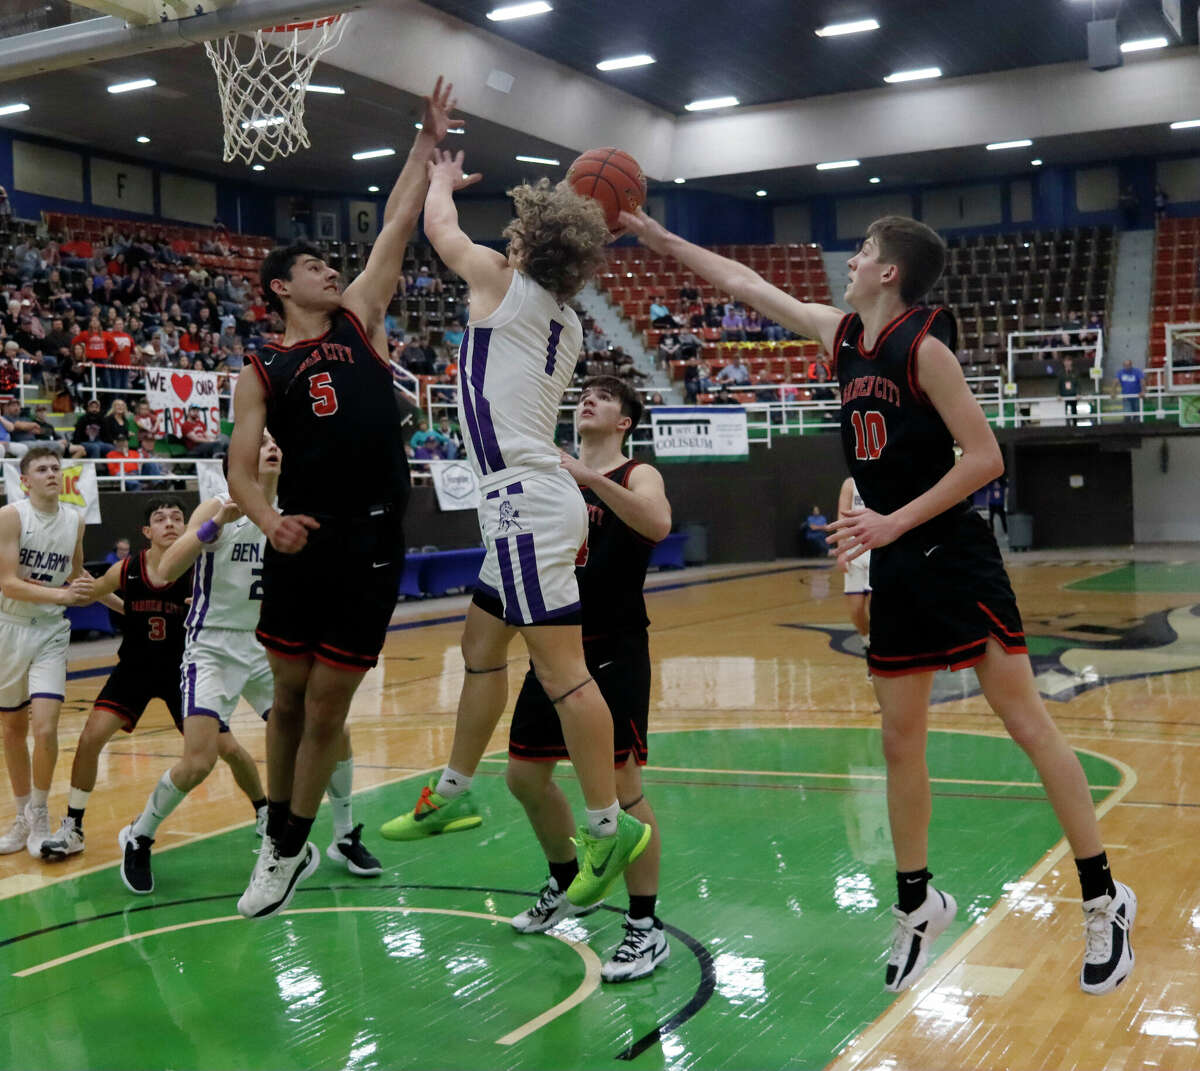 Benjamin's Grayson Rigdon (1) drives to the basket as Garden City's Julio Talamantes (5) and Texas Brinkley (10) defend during the Region II-1A final at The Colseum in Snyder on 3/4/2023